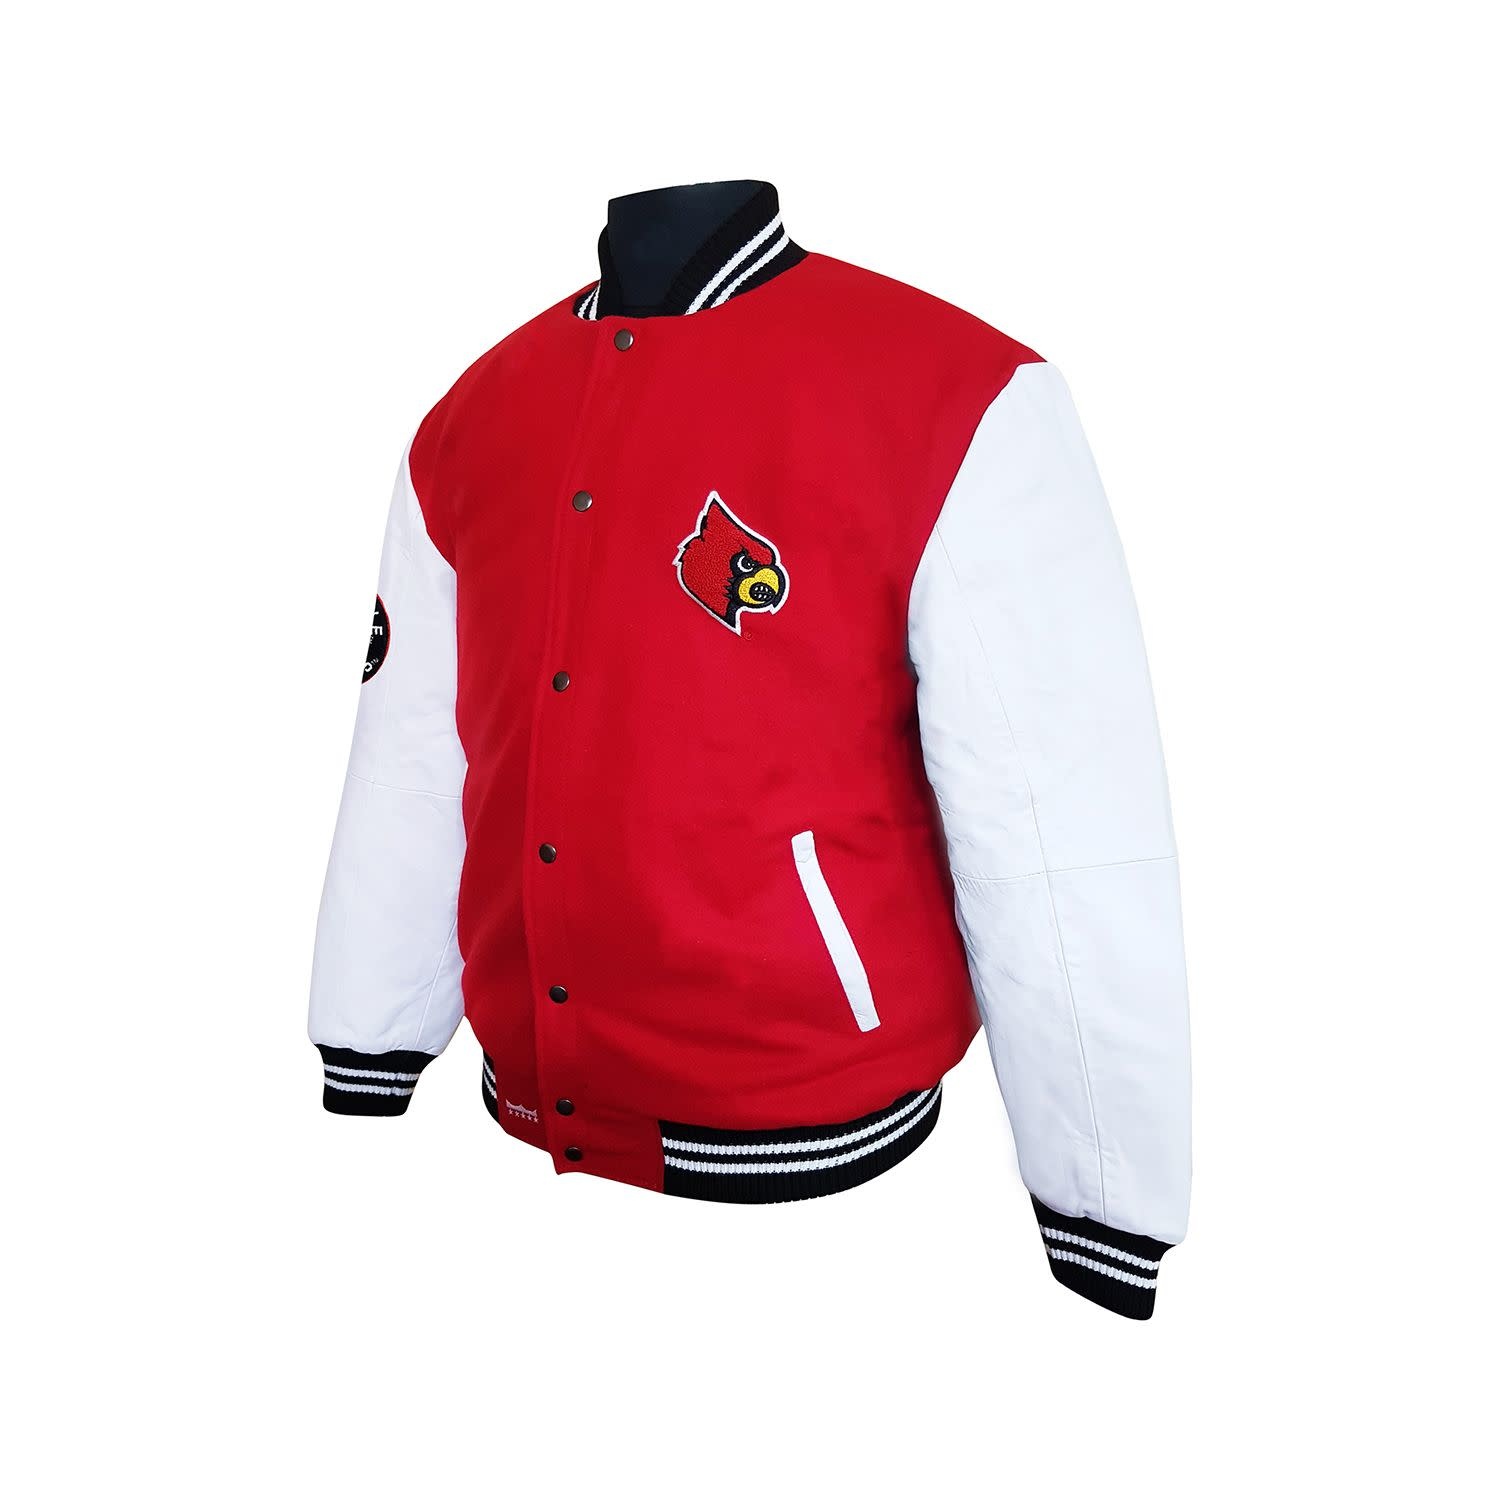 St. Louis Cardinals Wool Jacket w/ Handcrafted Leather Logos - Red